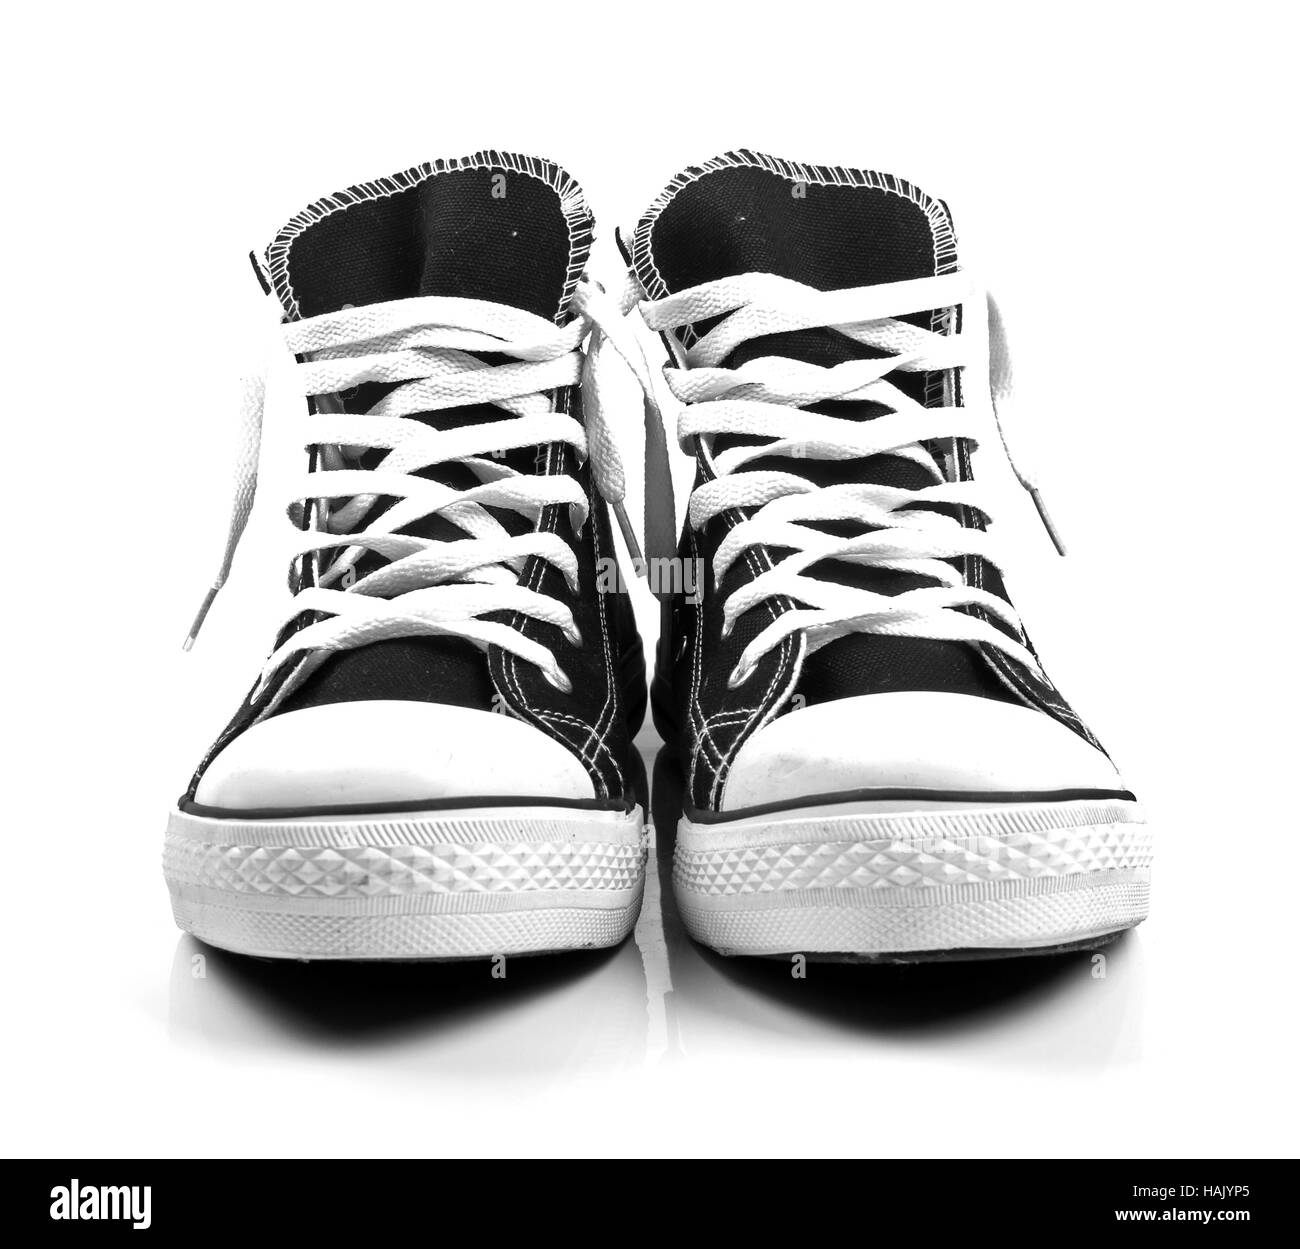 a pair of new sneakers isolated on white Stock Photo